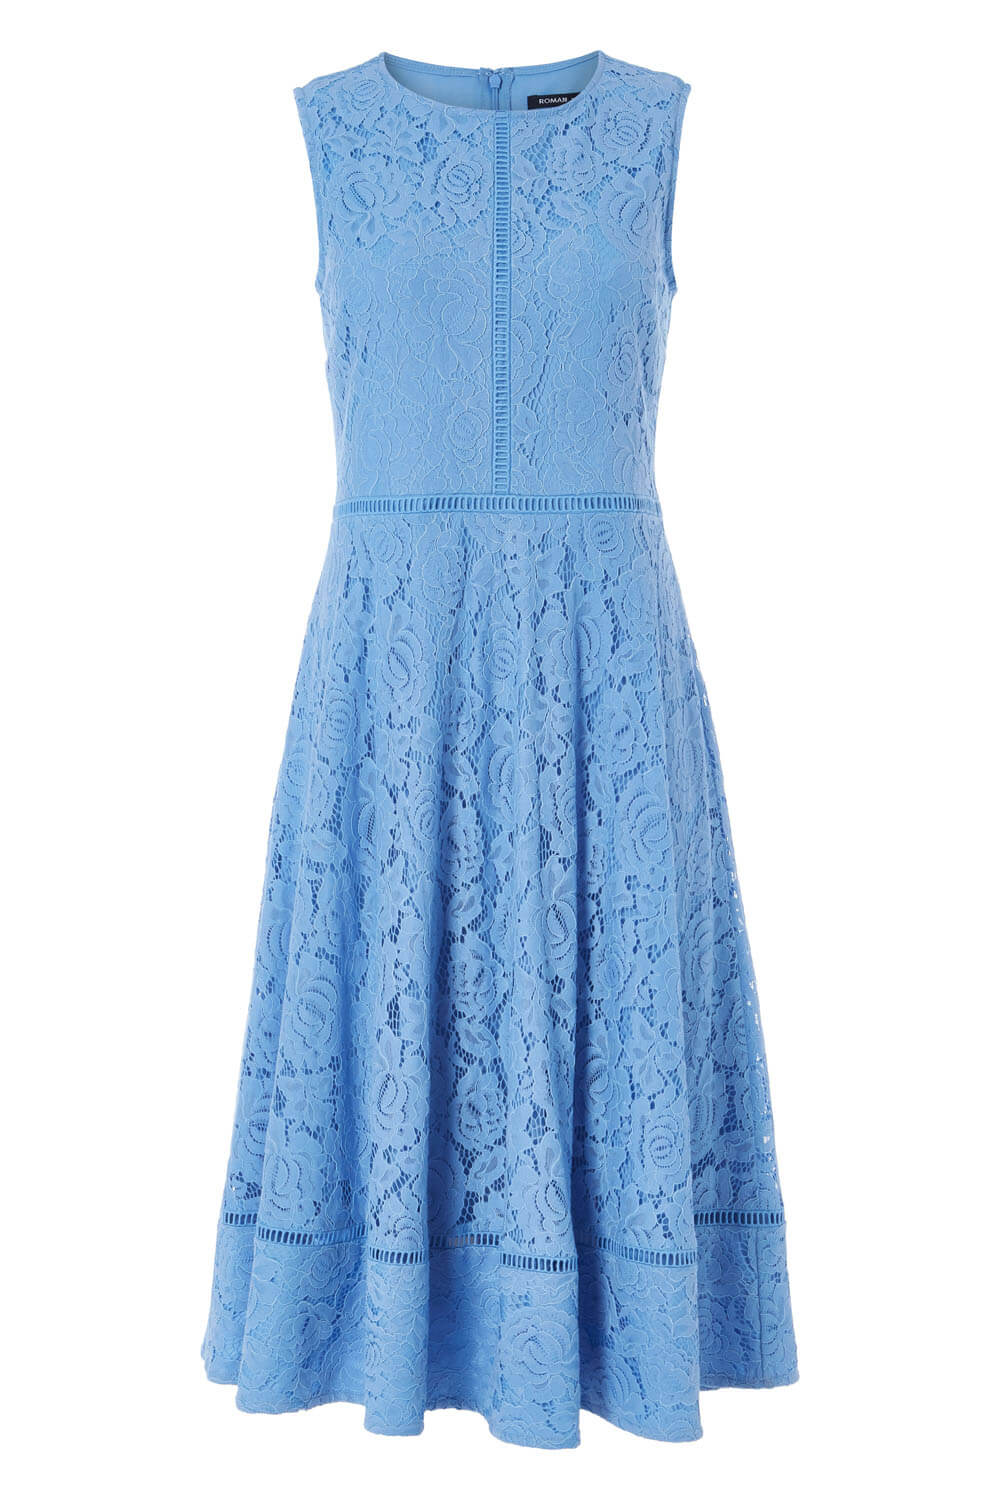 Blue Fit And Flare Lace Midi Dress, Image 5 of 5